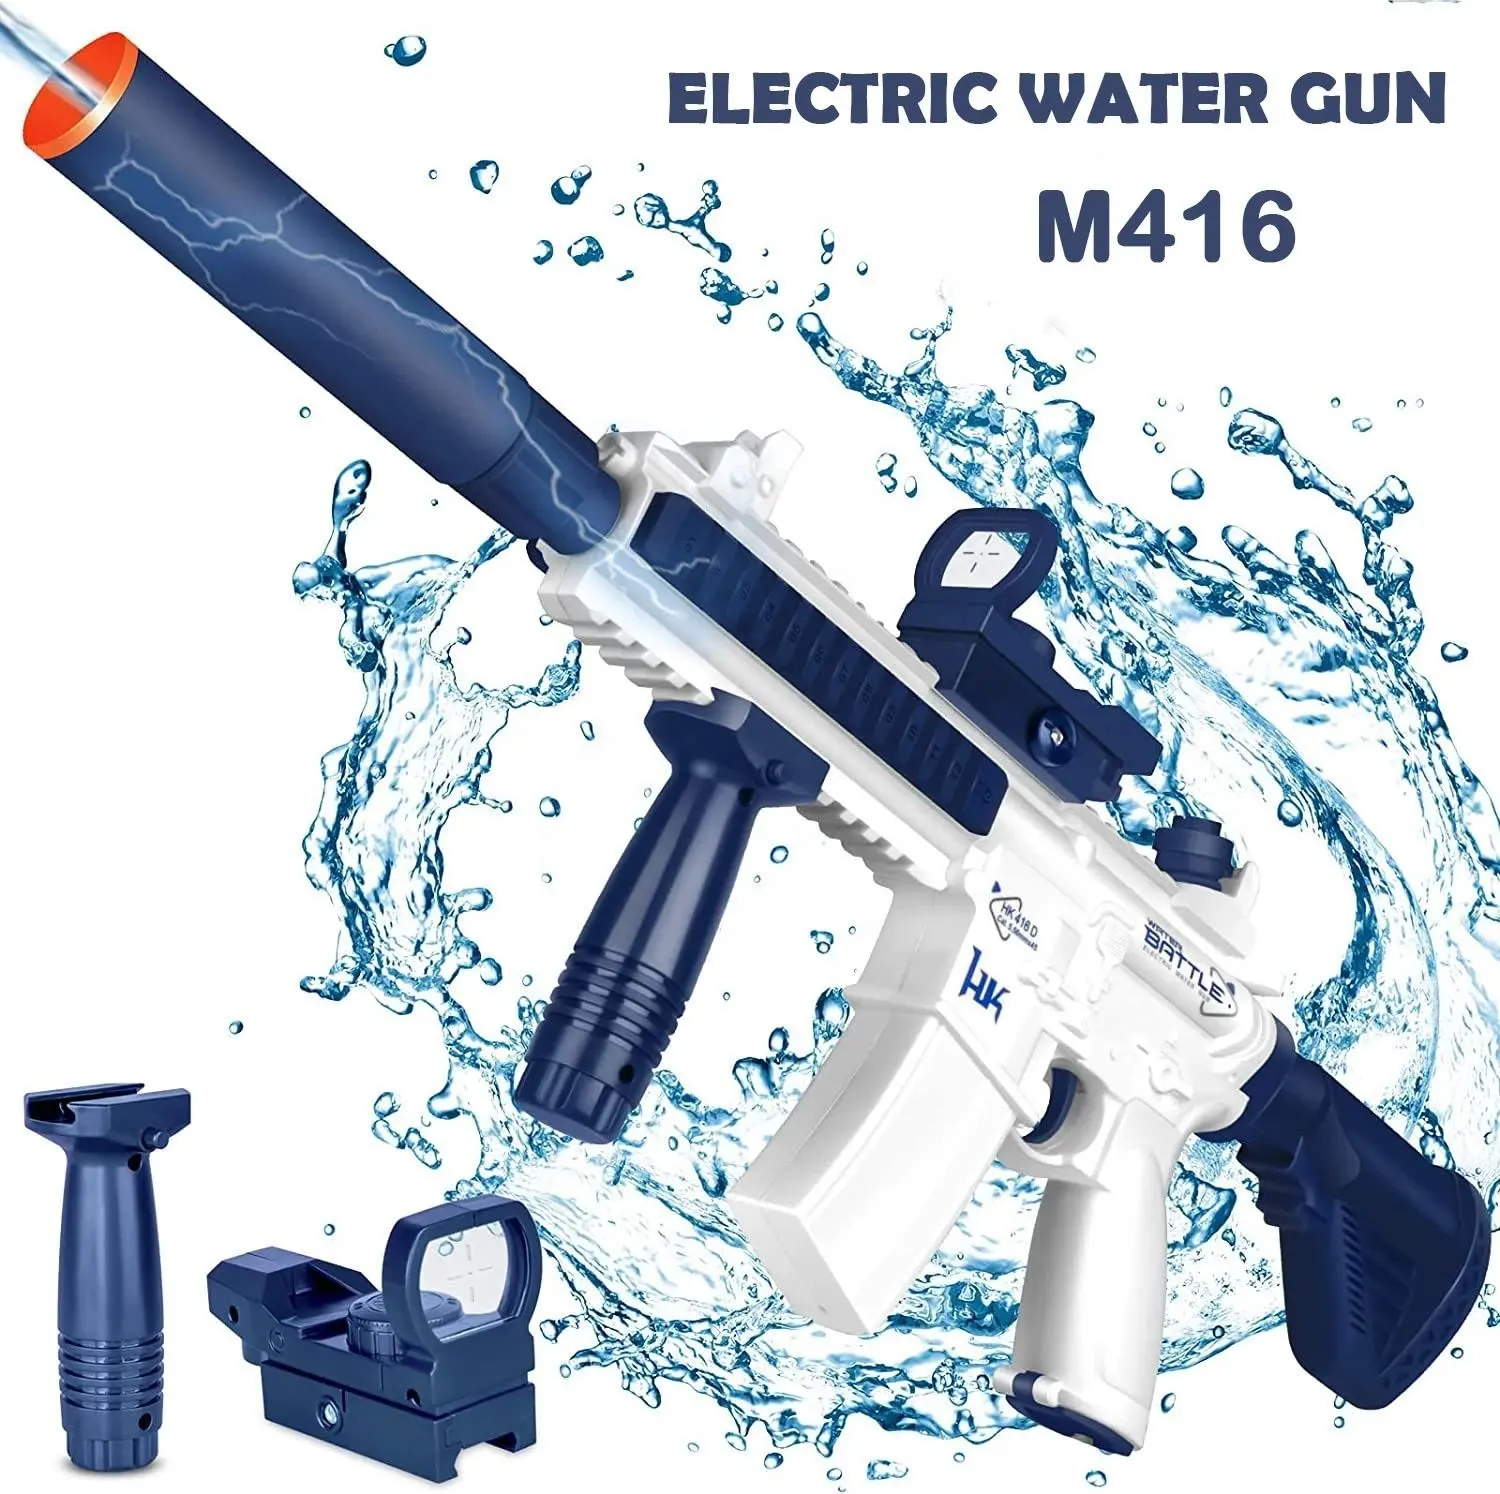 Summer outdoor shooting games Hot M416 Water Gun Electric Shooting Toy Full Automatic Summer Beach Toys for kids